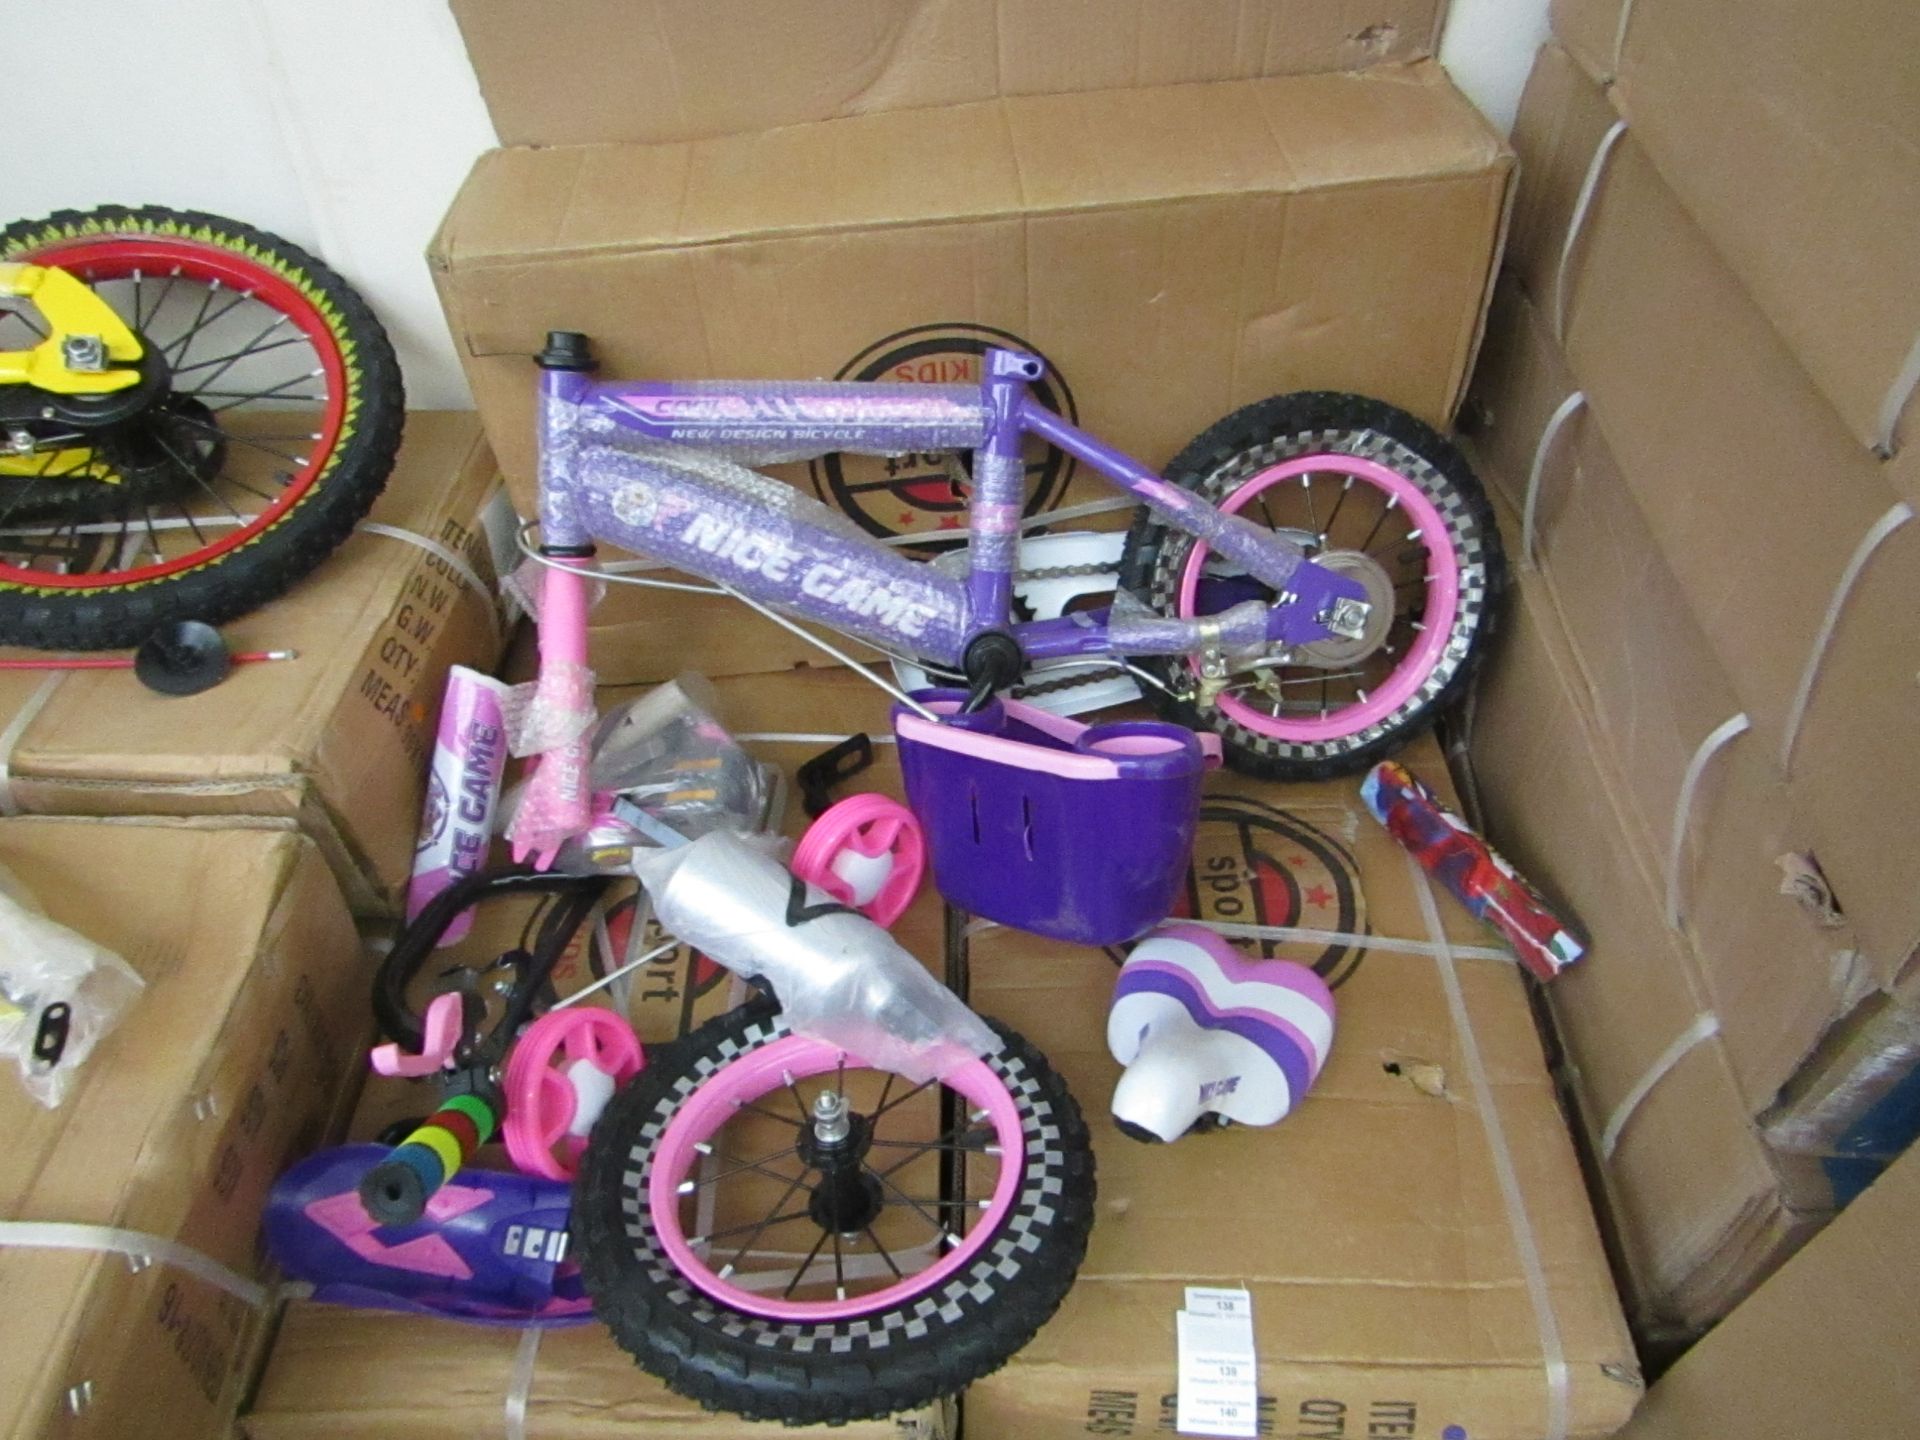 12" Child's Bike new and Boxed, comes complete with front basket, mud guards, water bottle and